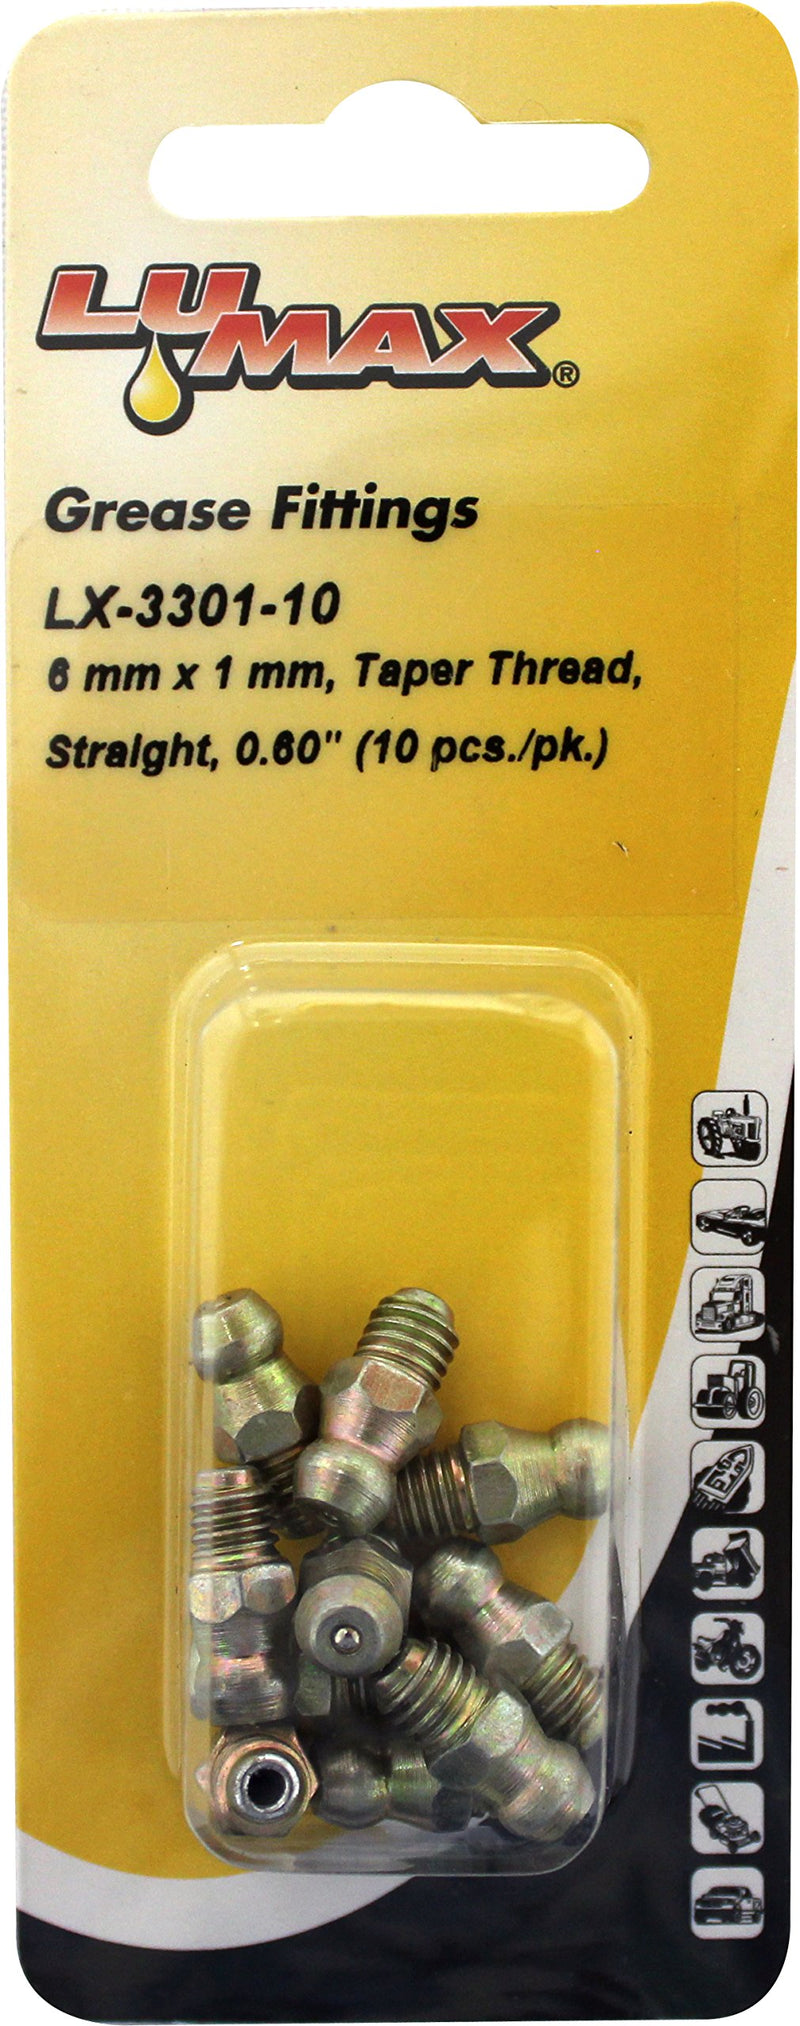 Lumax Gold/Silver LX-3301-10 6mm x 1mm Taper Metric Thread Straight 0.60" Long Grease Fitting, (Pack of 10). Heavier Wall Thickness for Extra Strength, 10 Pack - LeoForward Australia